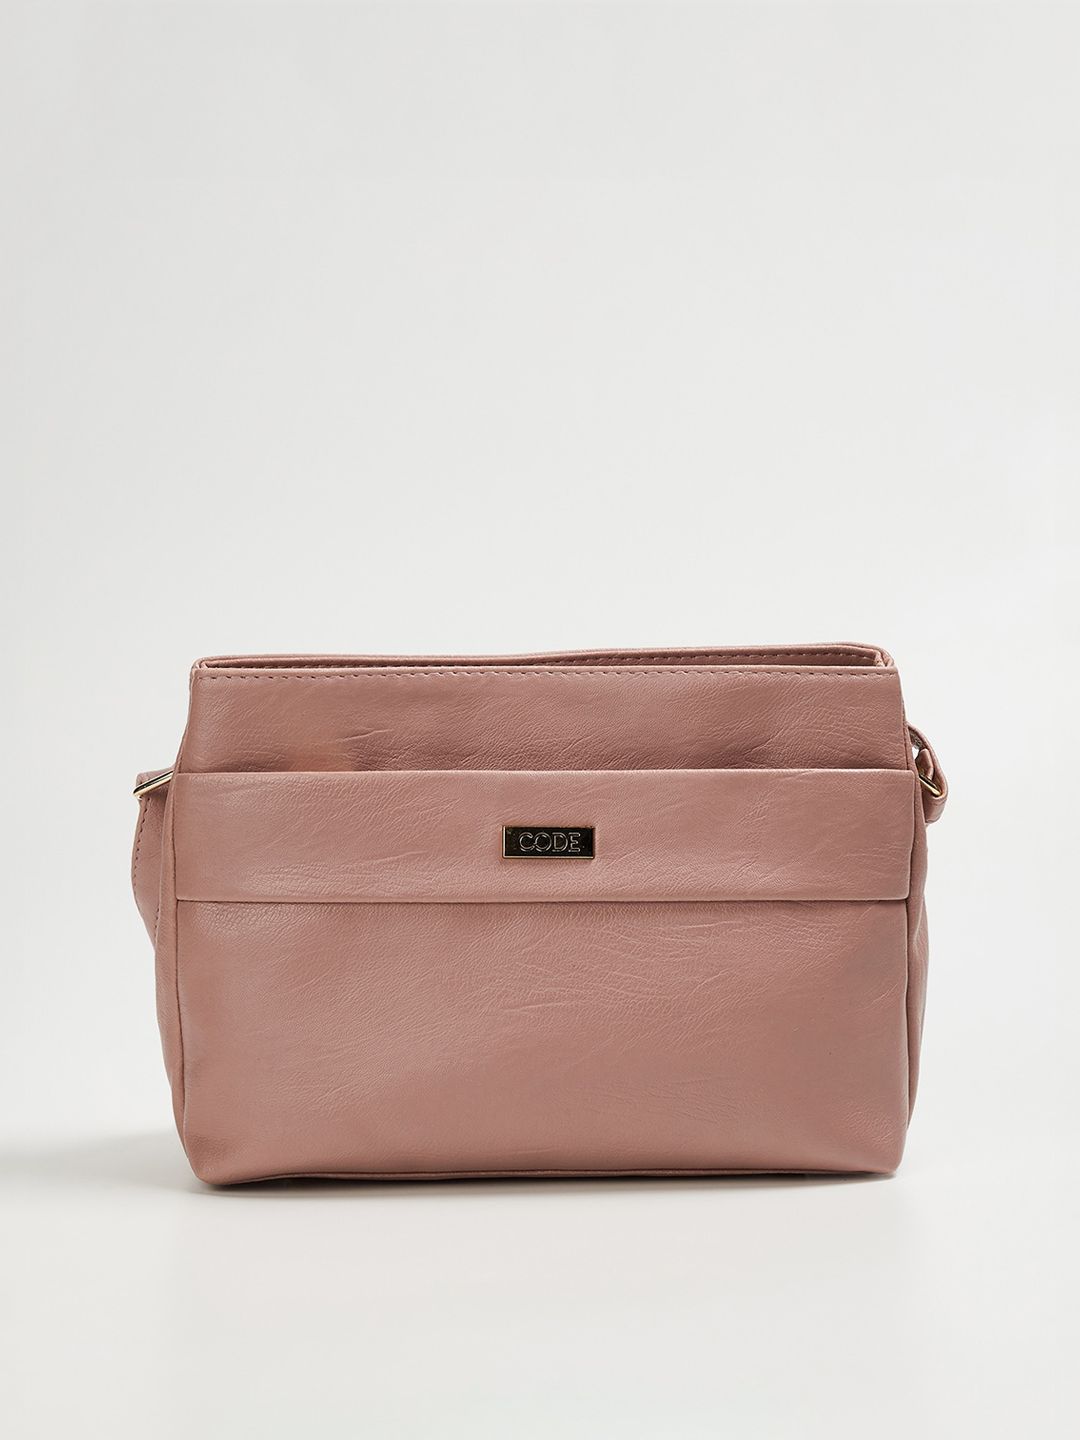 CODE by Lifestyle Pink Solid Sling Bag Price in India